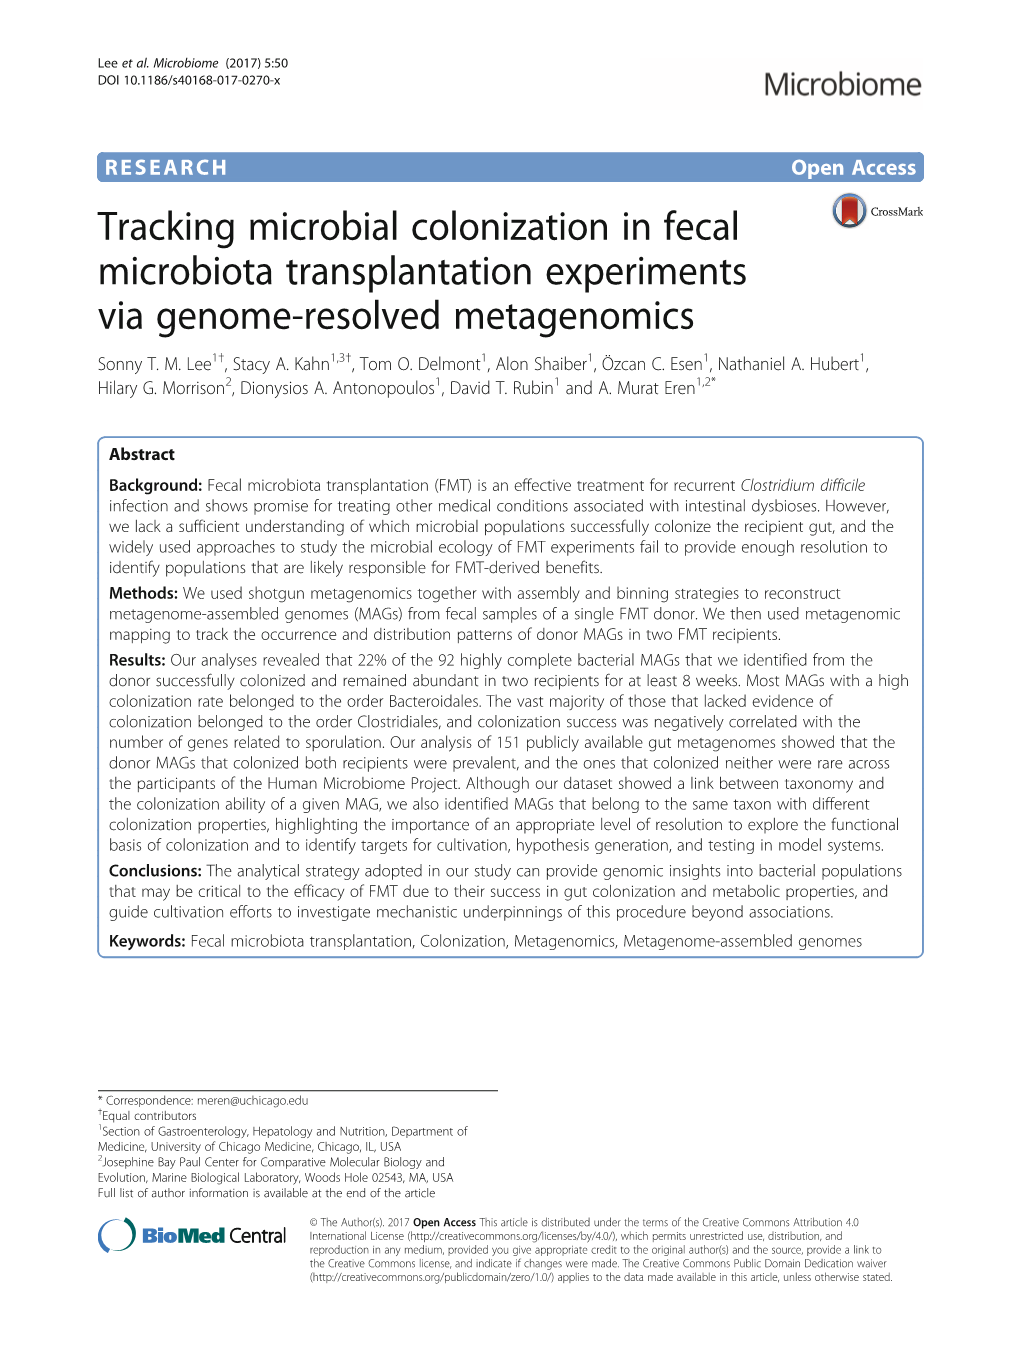 Tracking Microbial Colonization in Fecal Microbiota Transplantation Experiments Via Genome-Resolved Metagenomics Sonny T